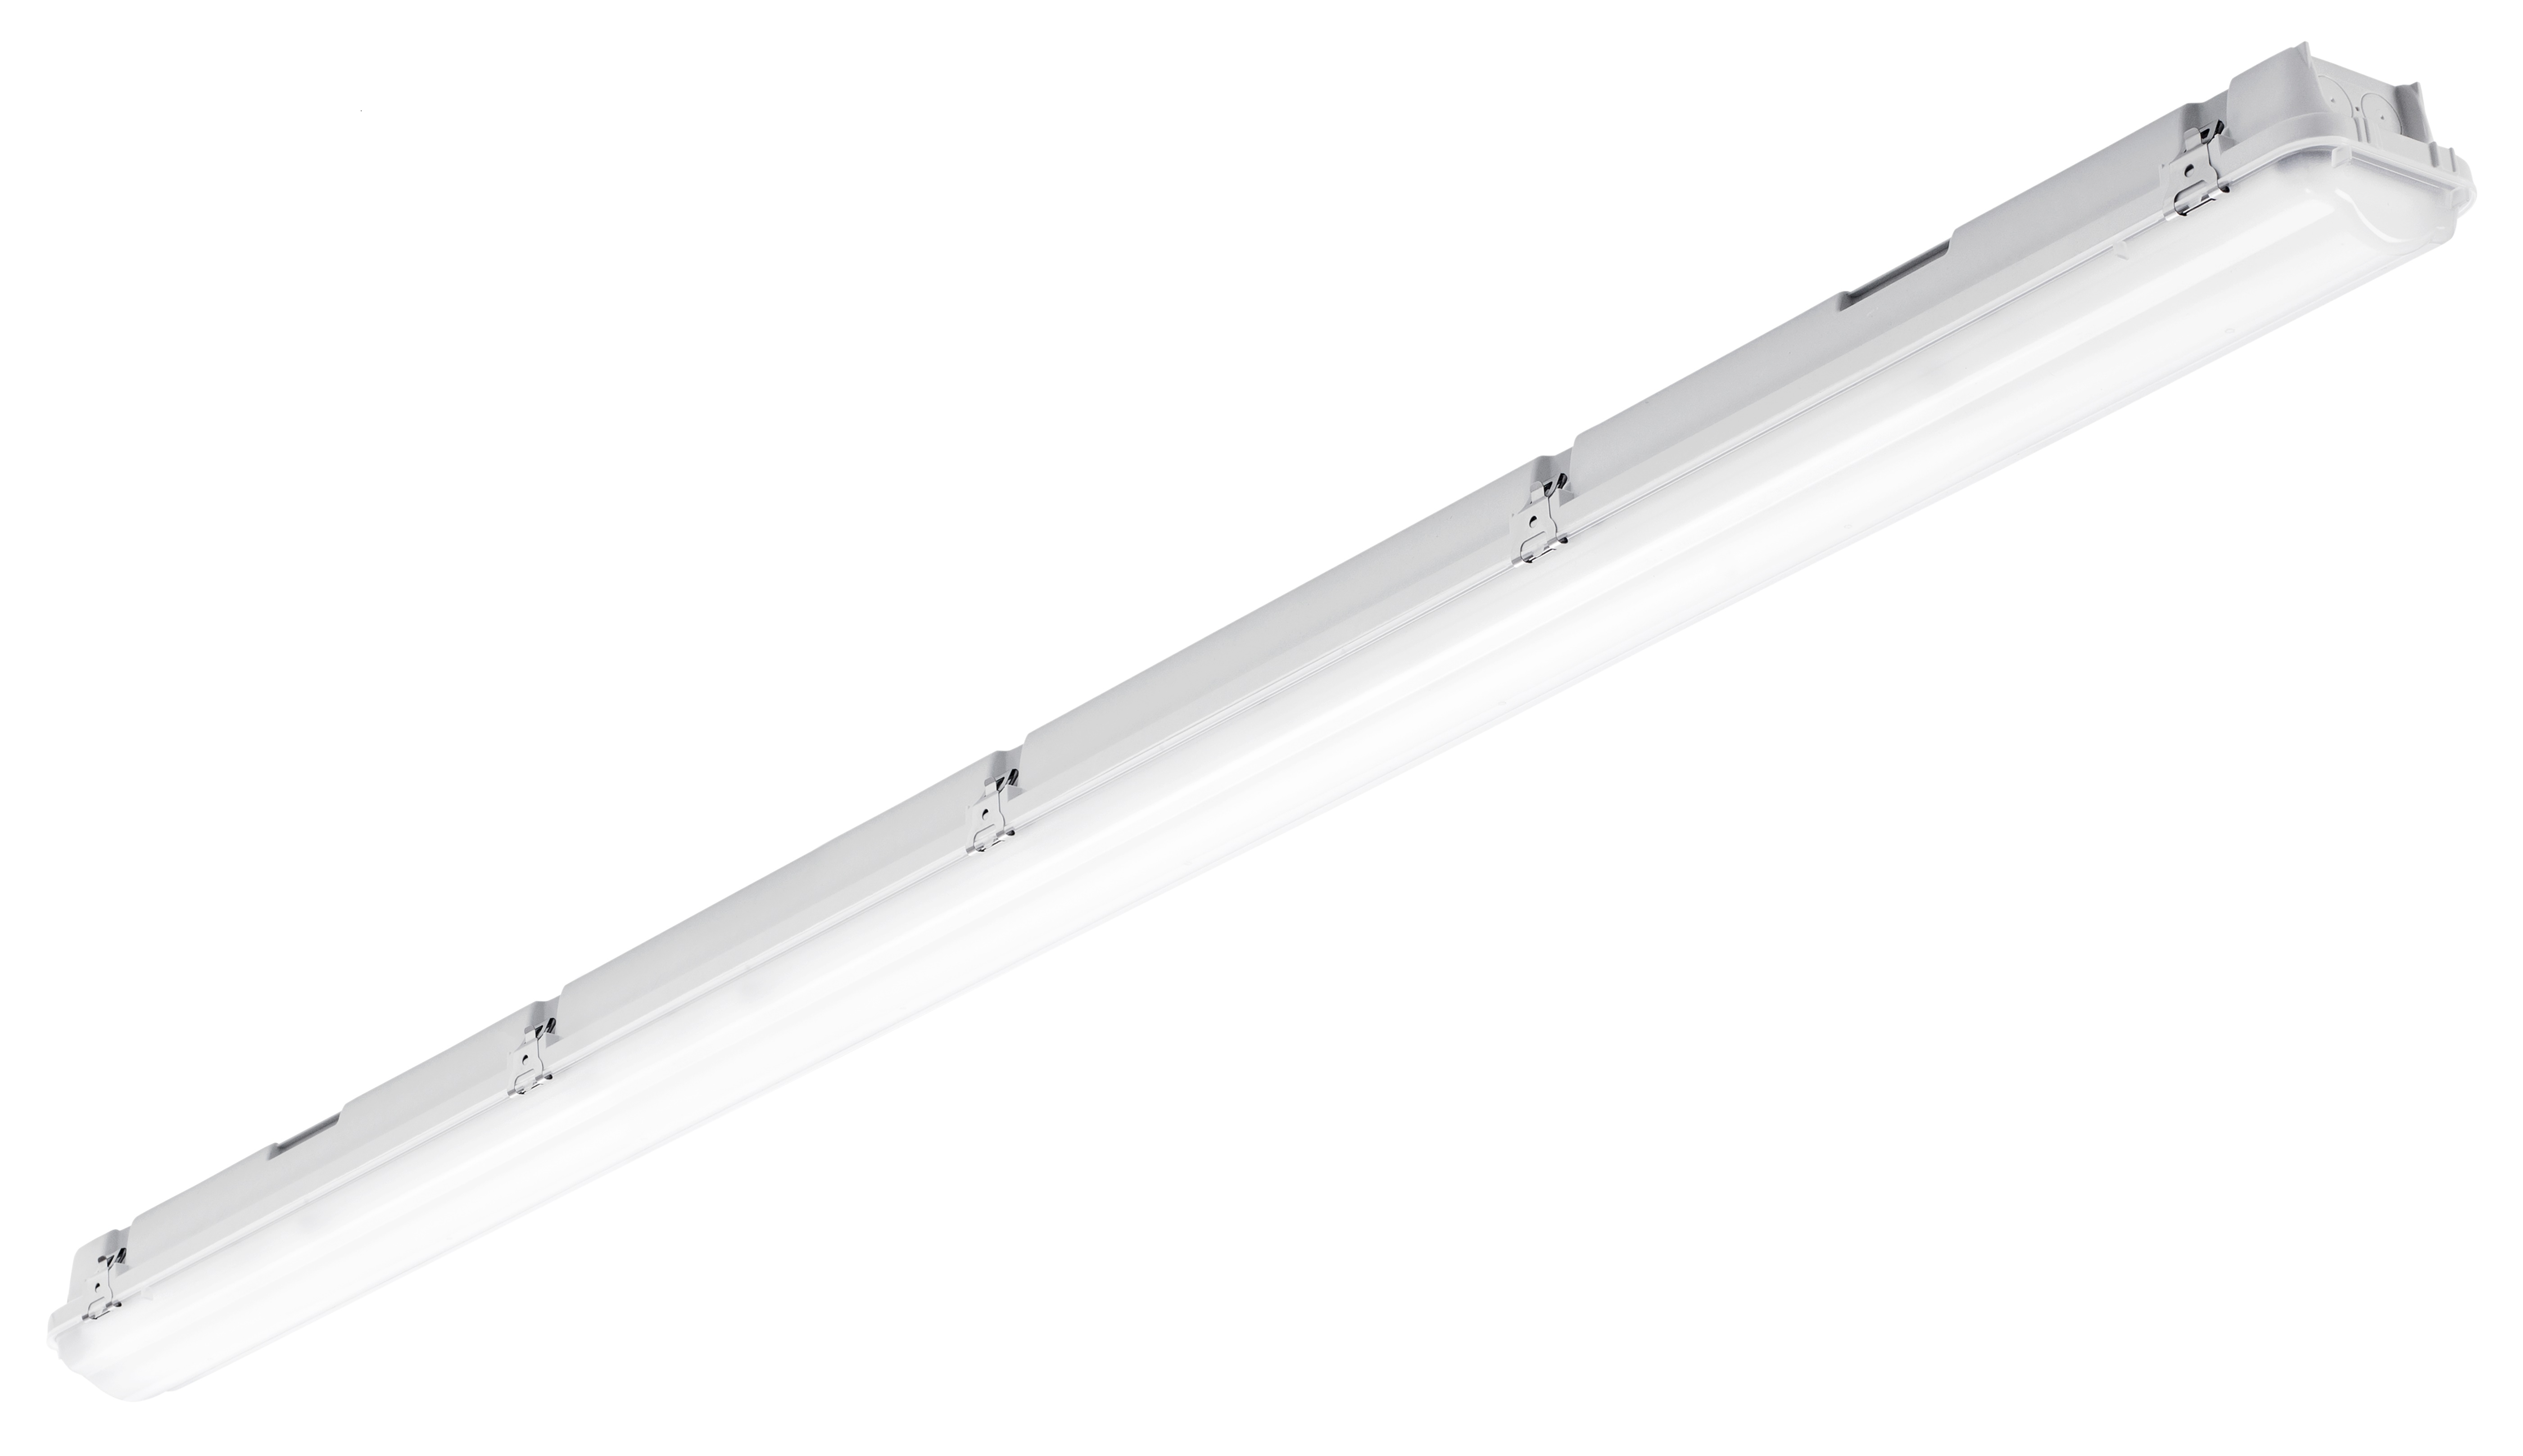 Luxproof 3 FLEX LED-Feuchtraumleuchte 46W PC, IP66, 4000 K, 6000 lm, Inox  Clips, PC-Gehäuse Länge 1573 mm - MINUSINES S.A.